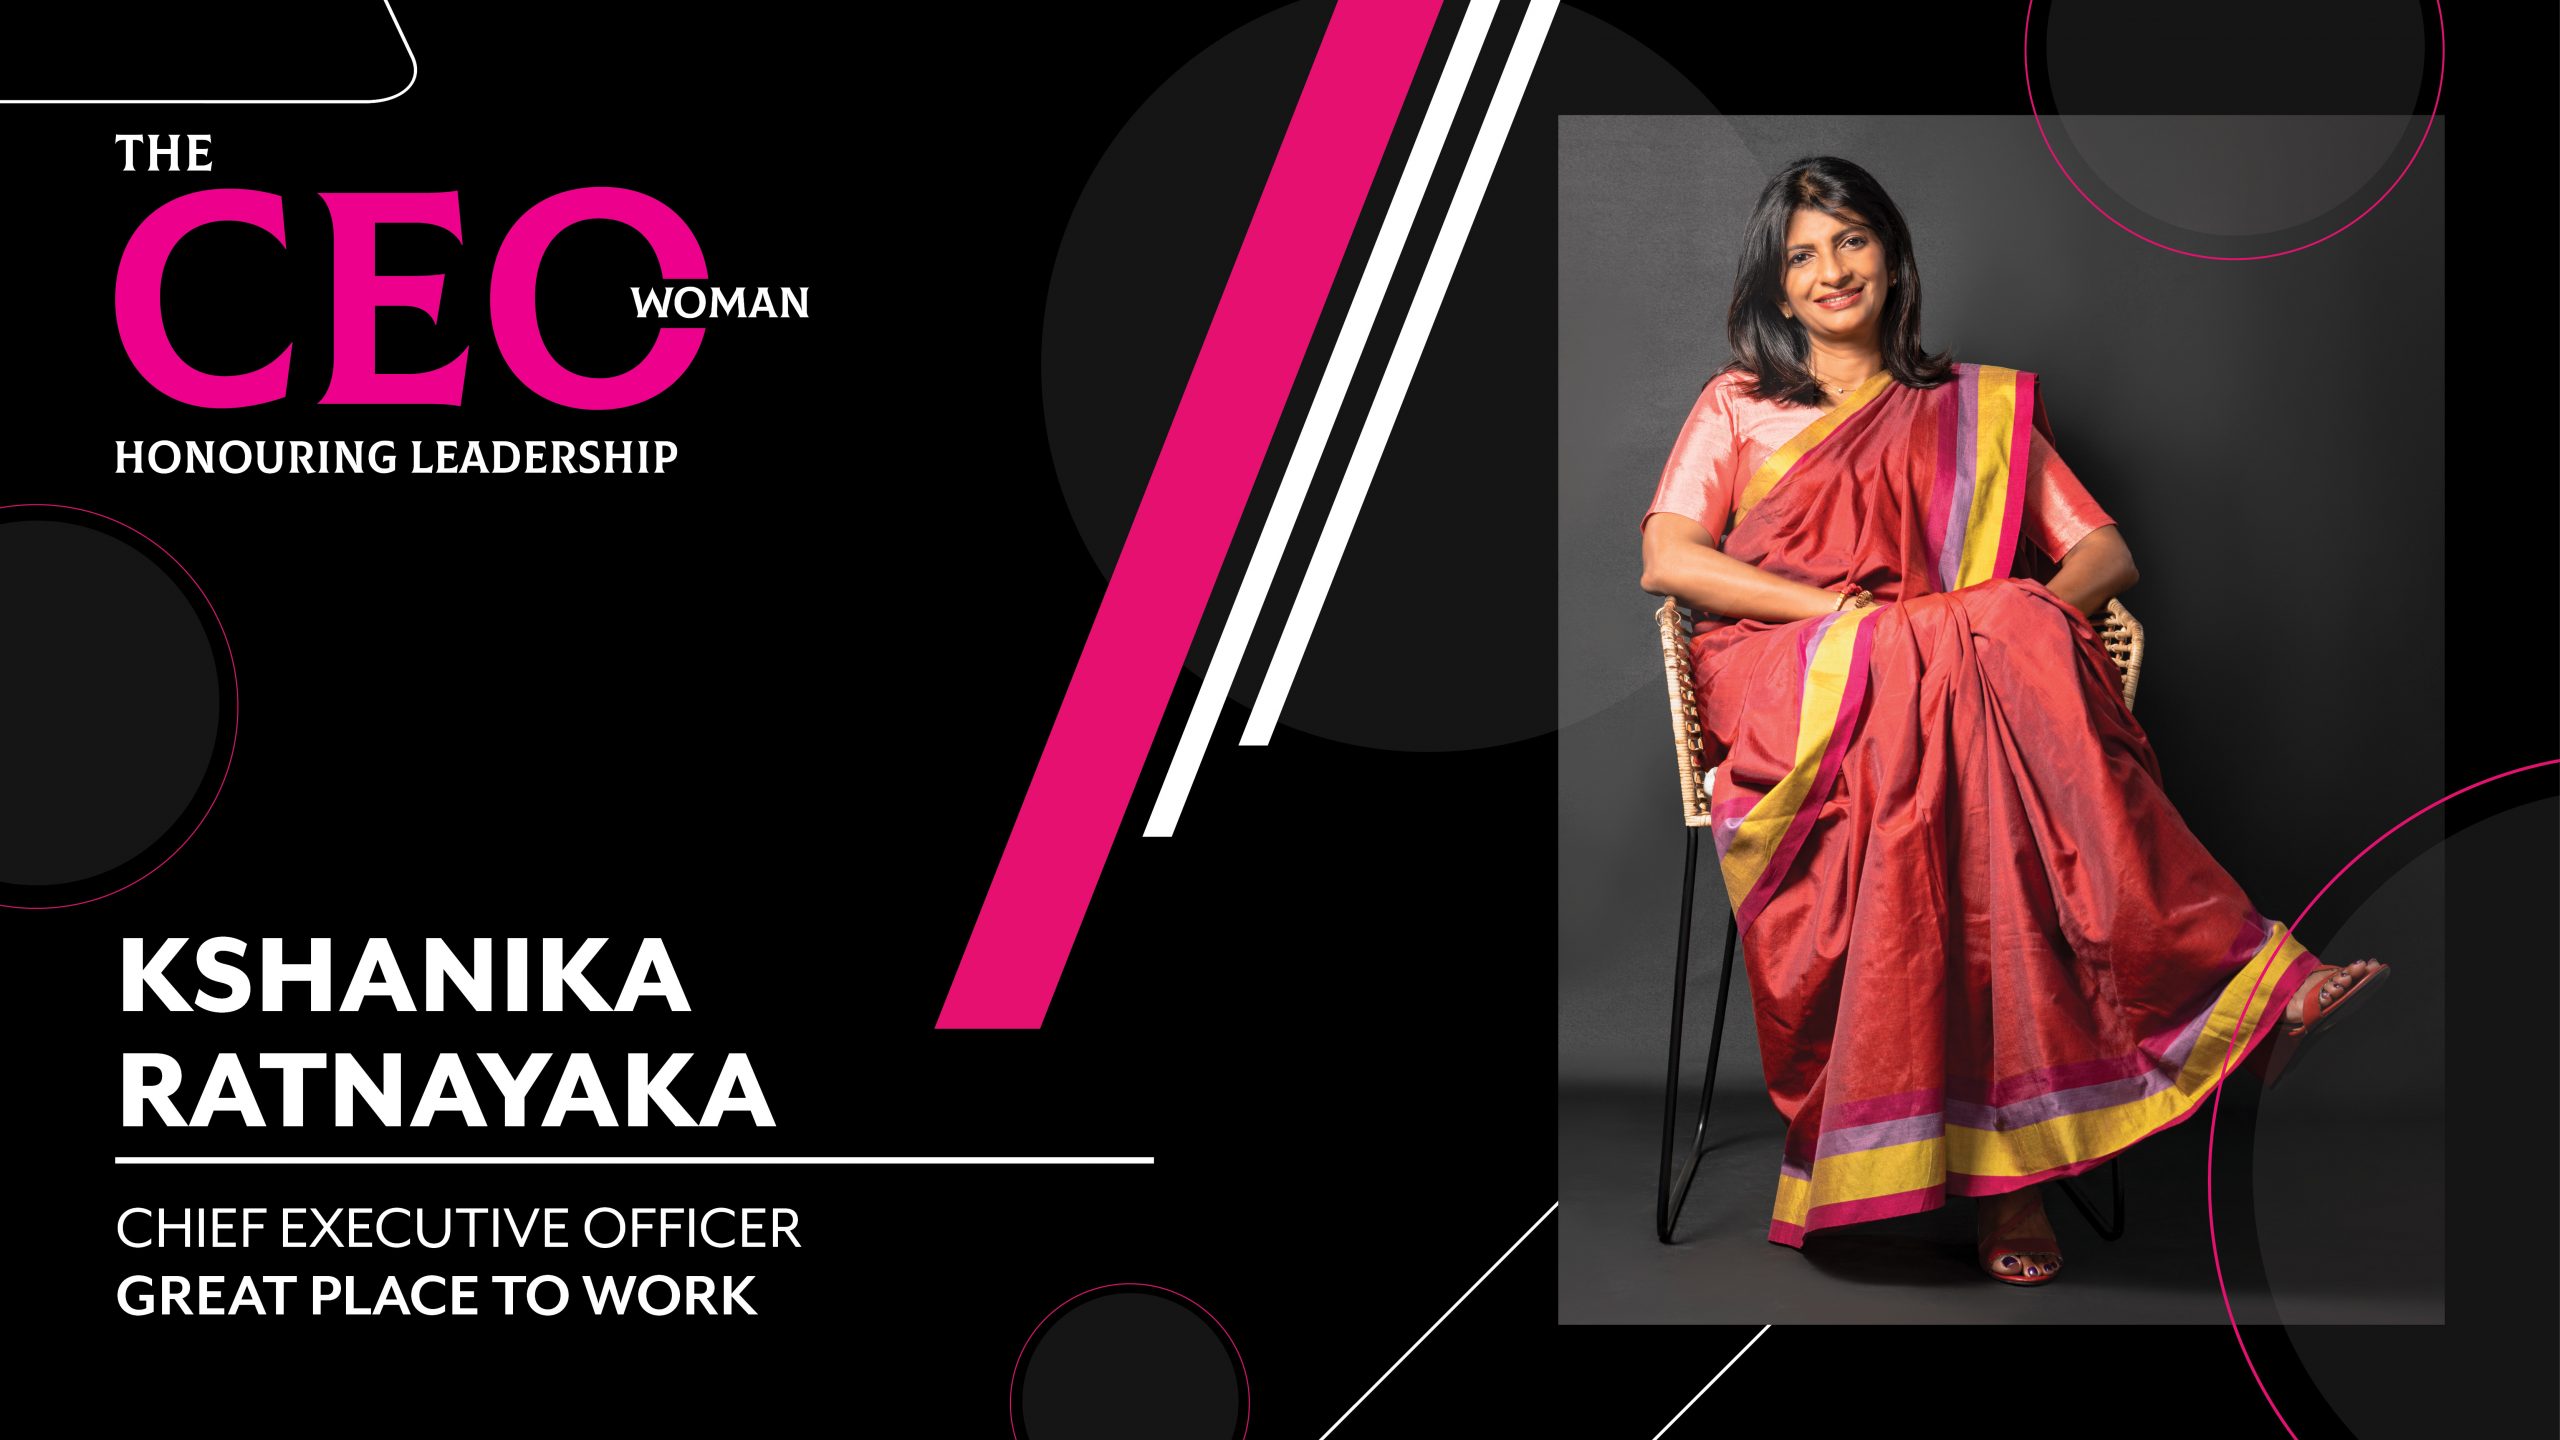 Challenging Conventions and Shattering Barriers – the Chief Executive Officer at Great Place to Work , Kshanika Ratnayaka